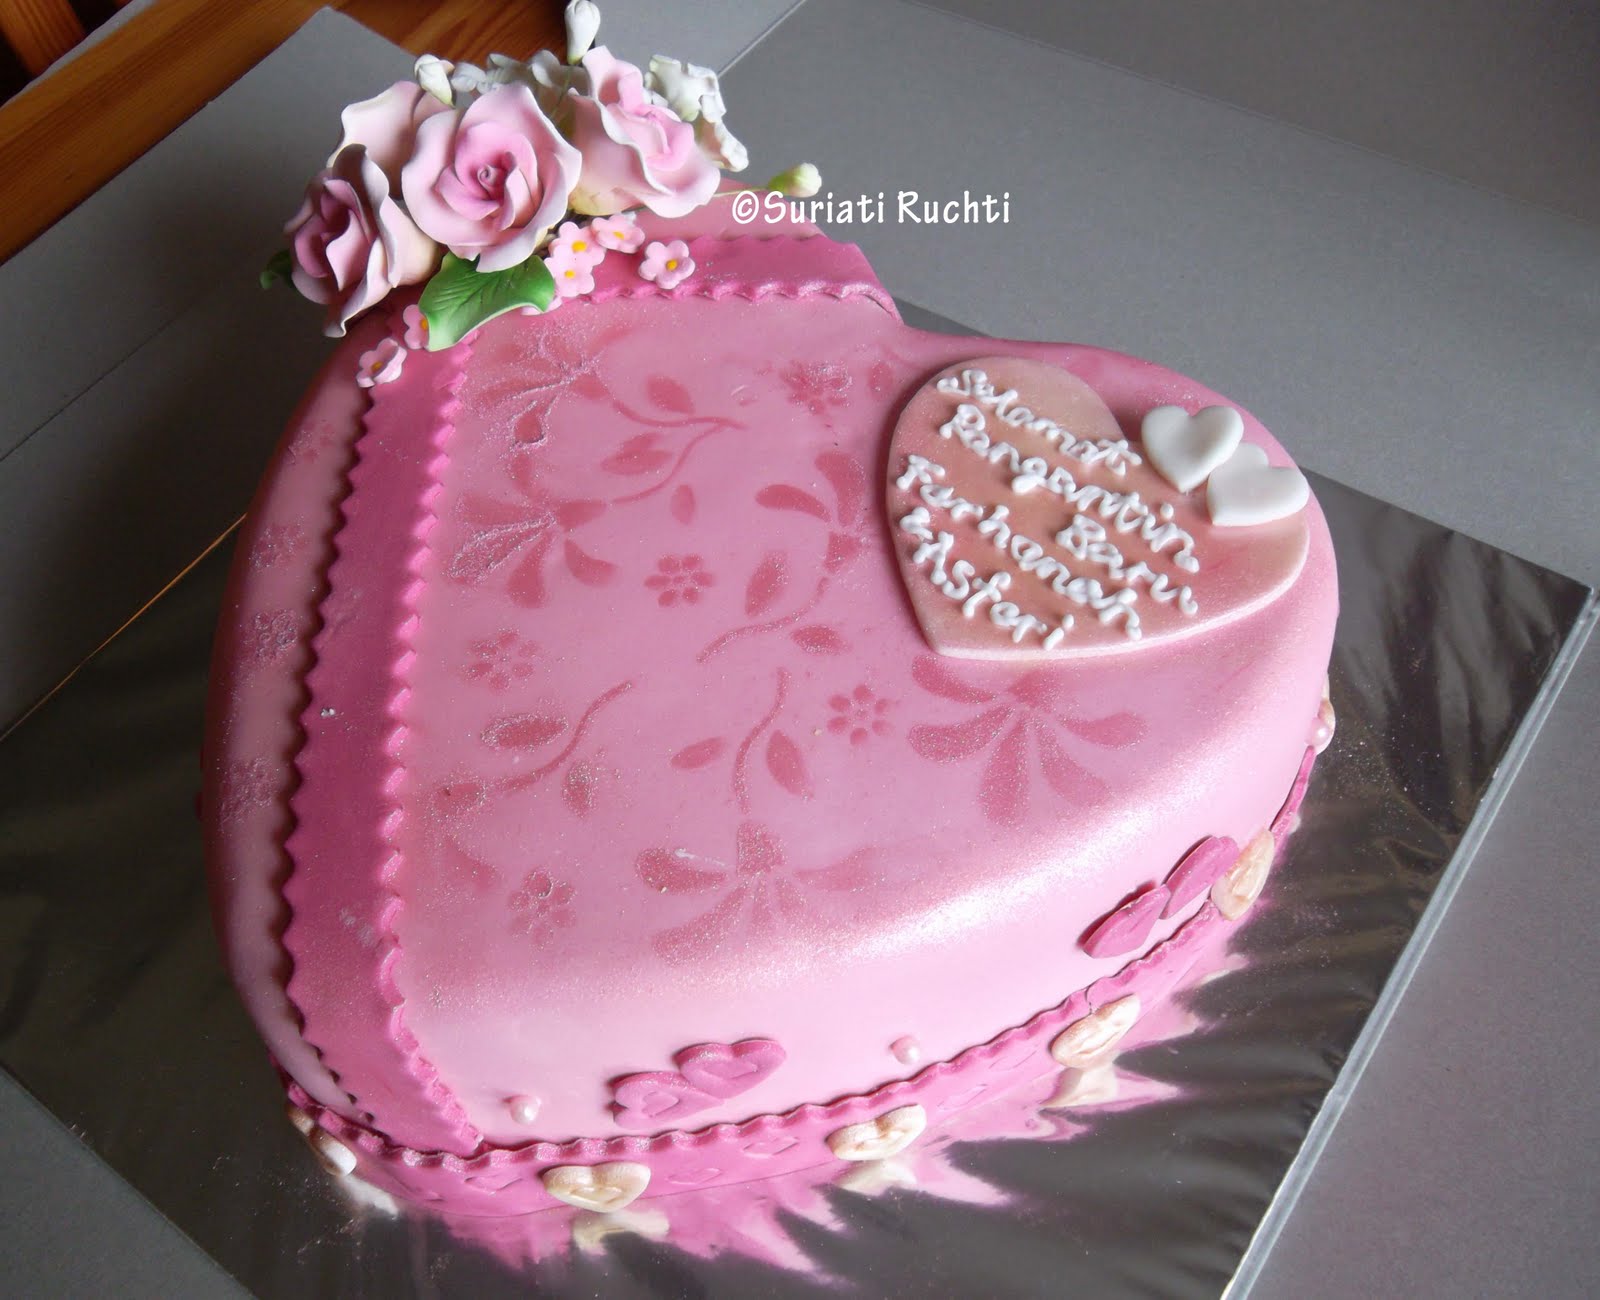 chocolate cake with strawberries and whipped cream Pink Heart Cake & Tarts for Ms Julaiha!